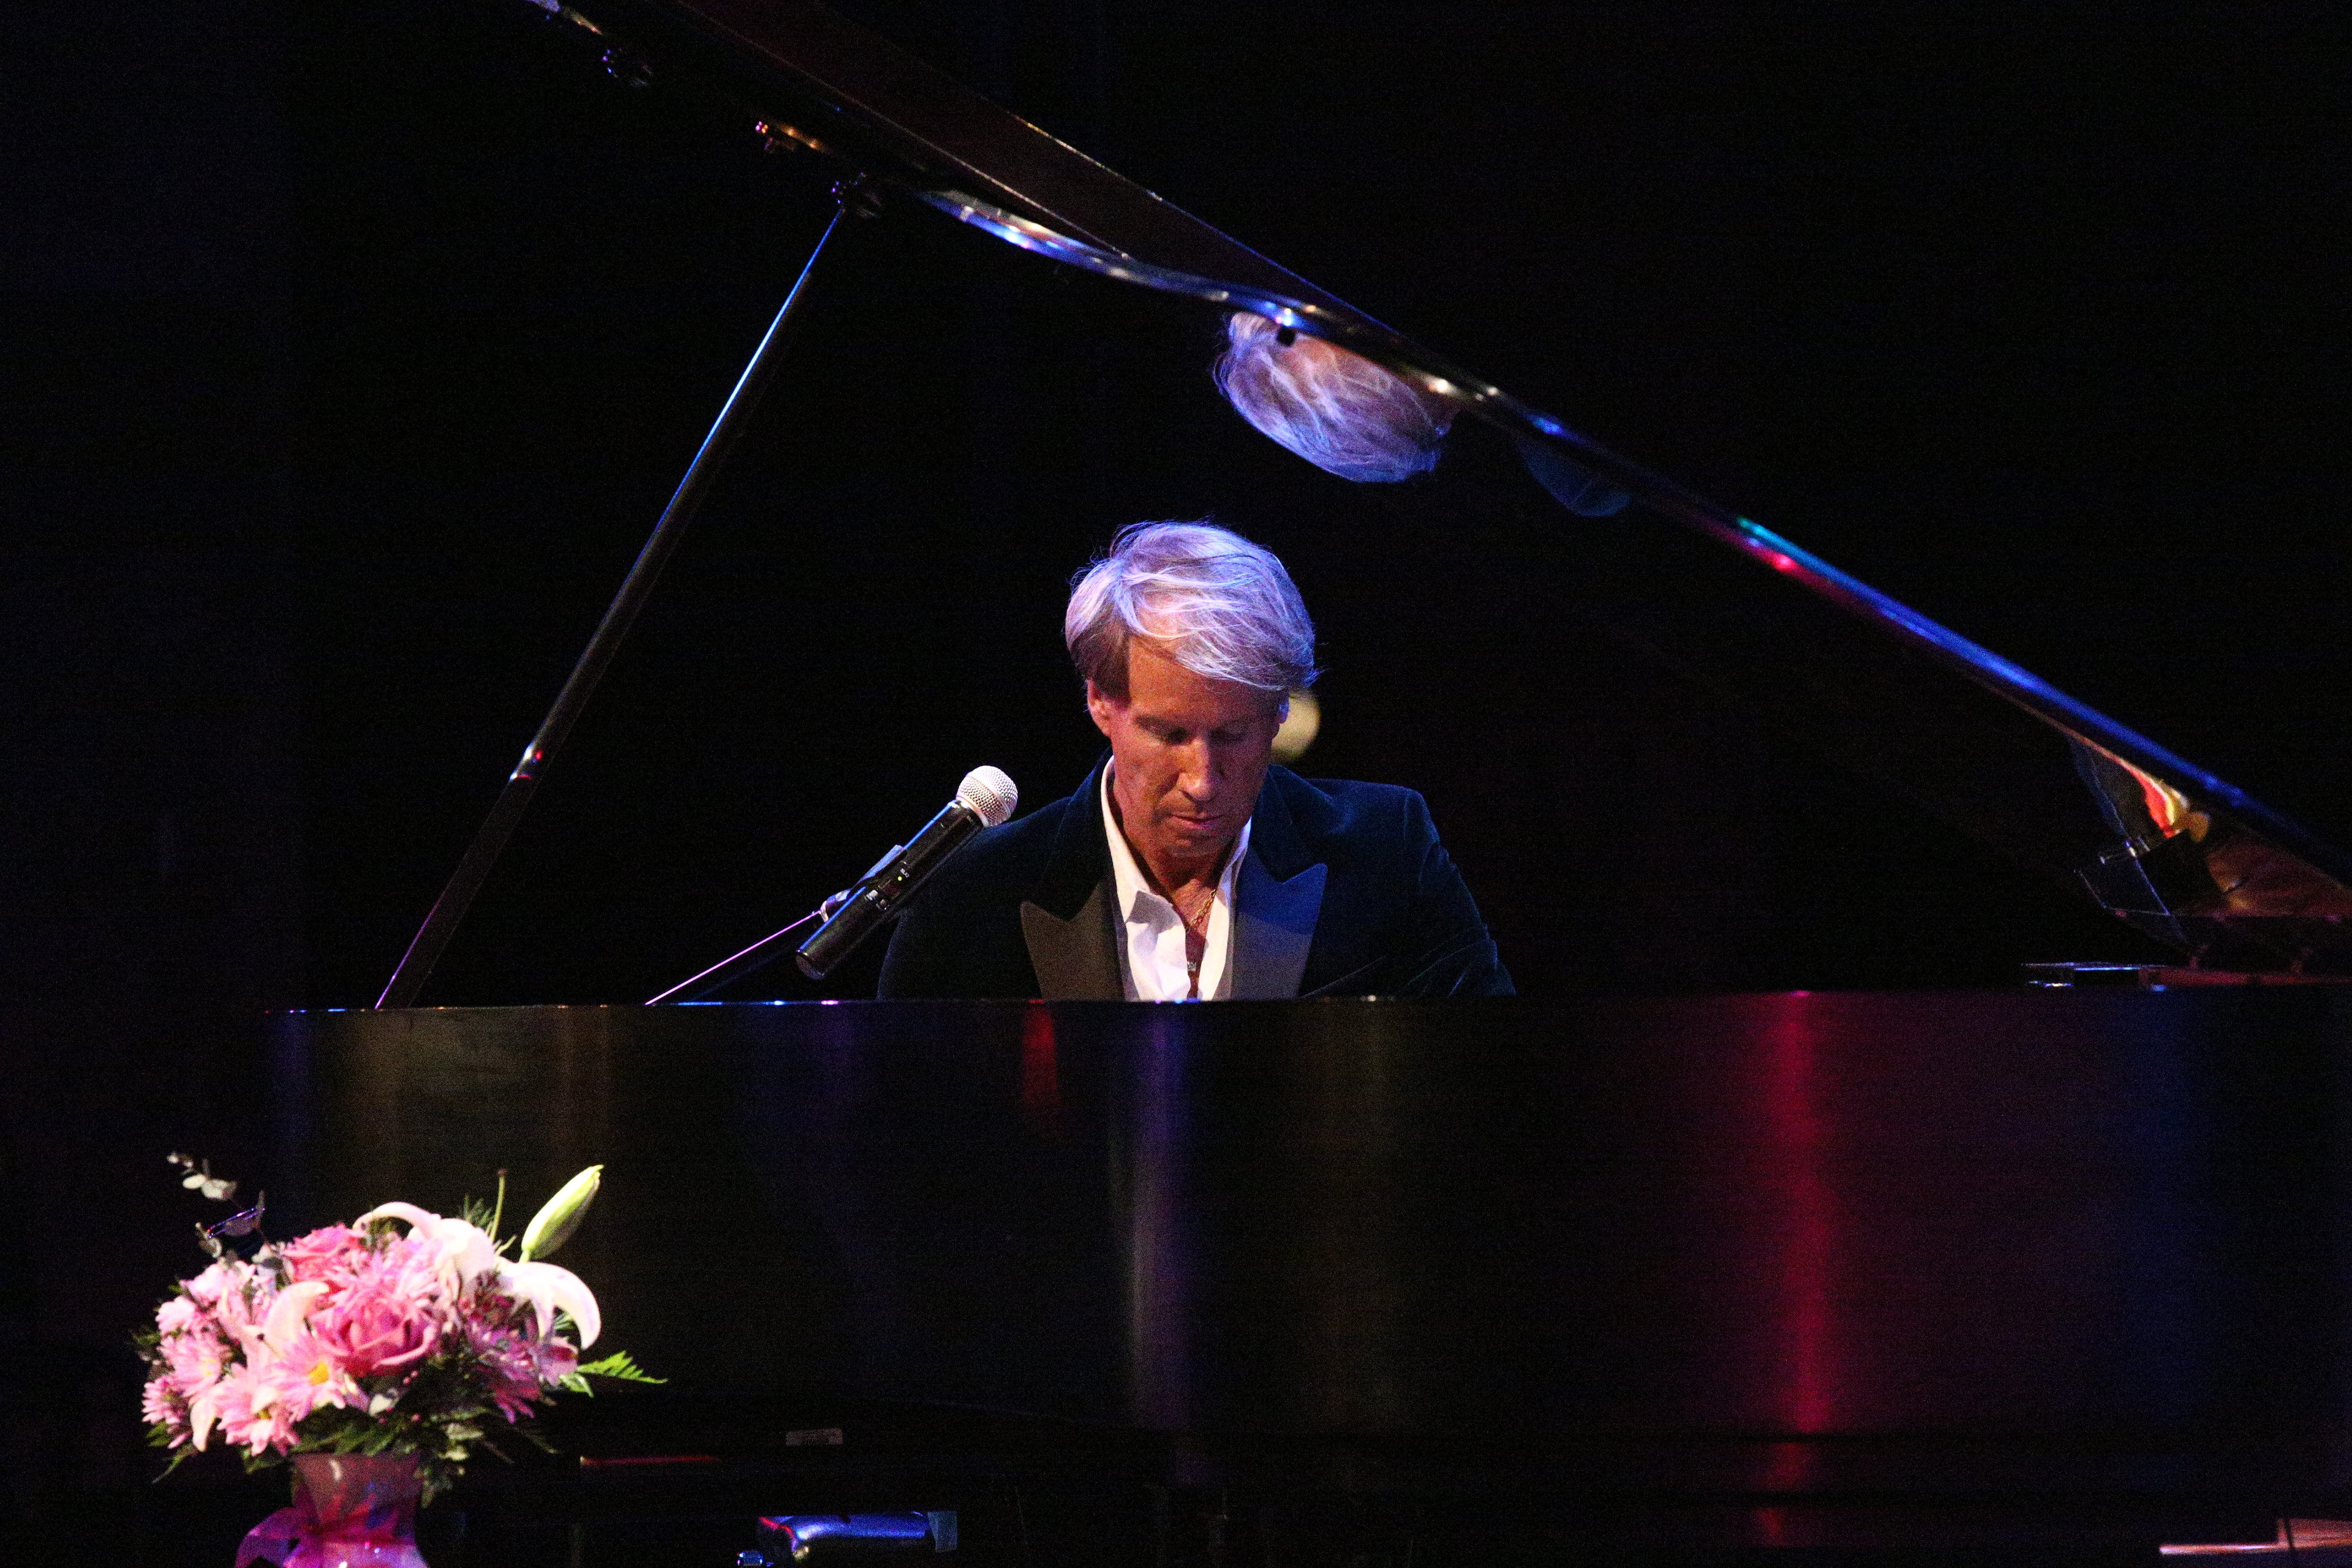 Danny Wright in concert, 2013